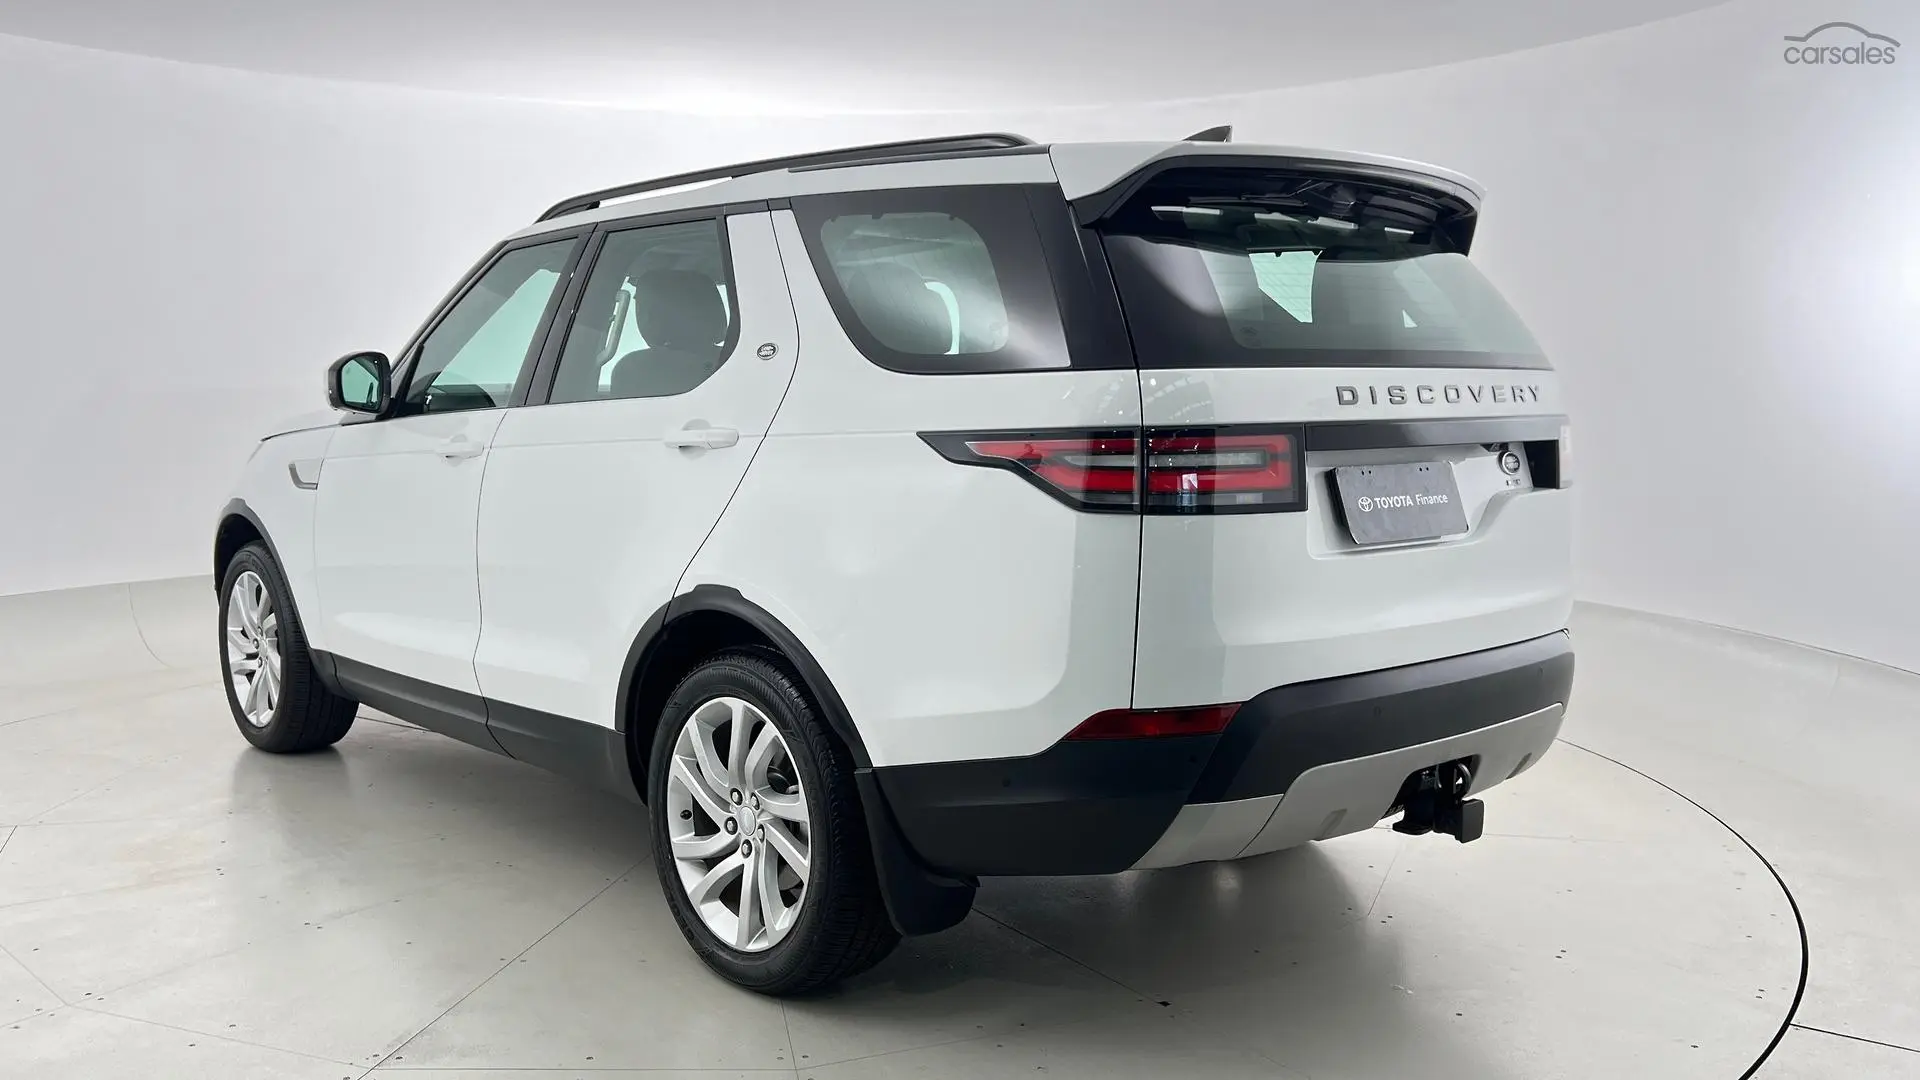 2018 Land Rover Discovery Image 2